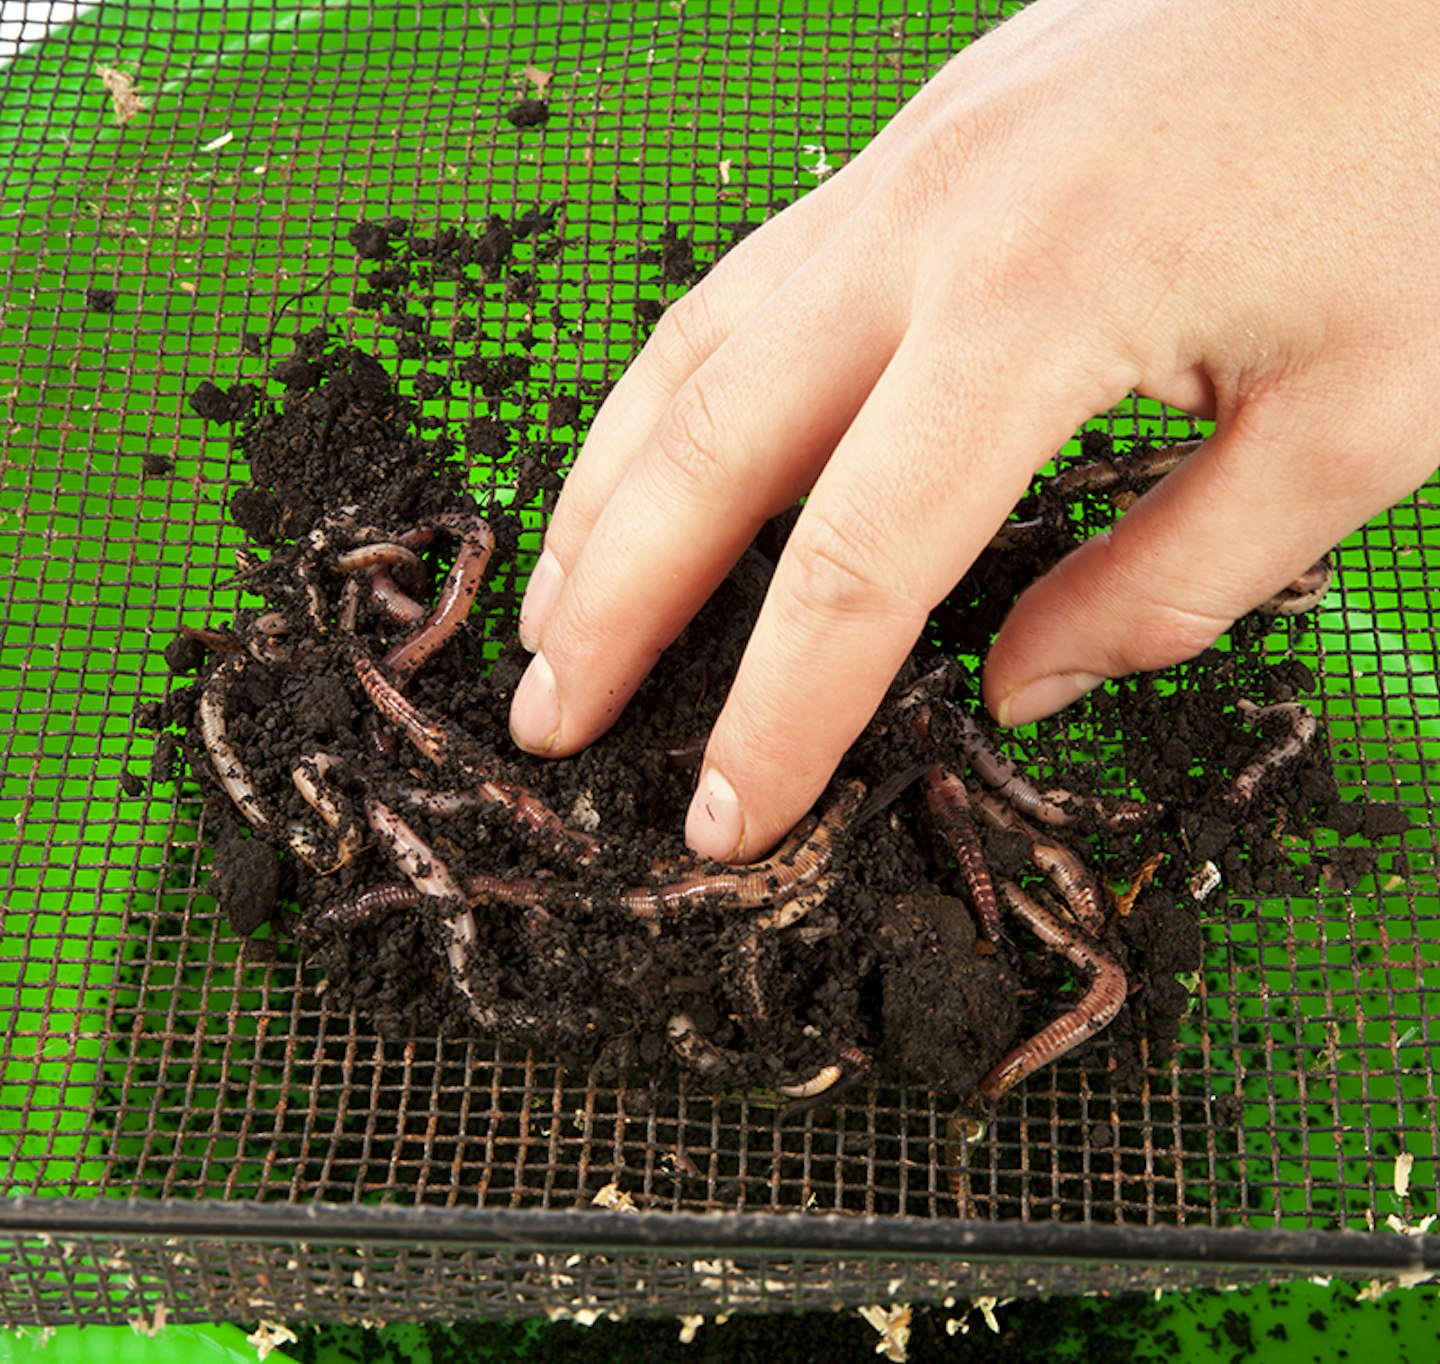 QUESTION 3) IS THERE AN EASY WAY TO CLEAN WORMS BEFORE CHOPPING THEM? 